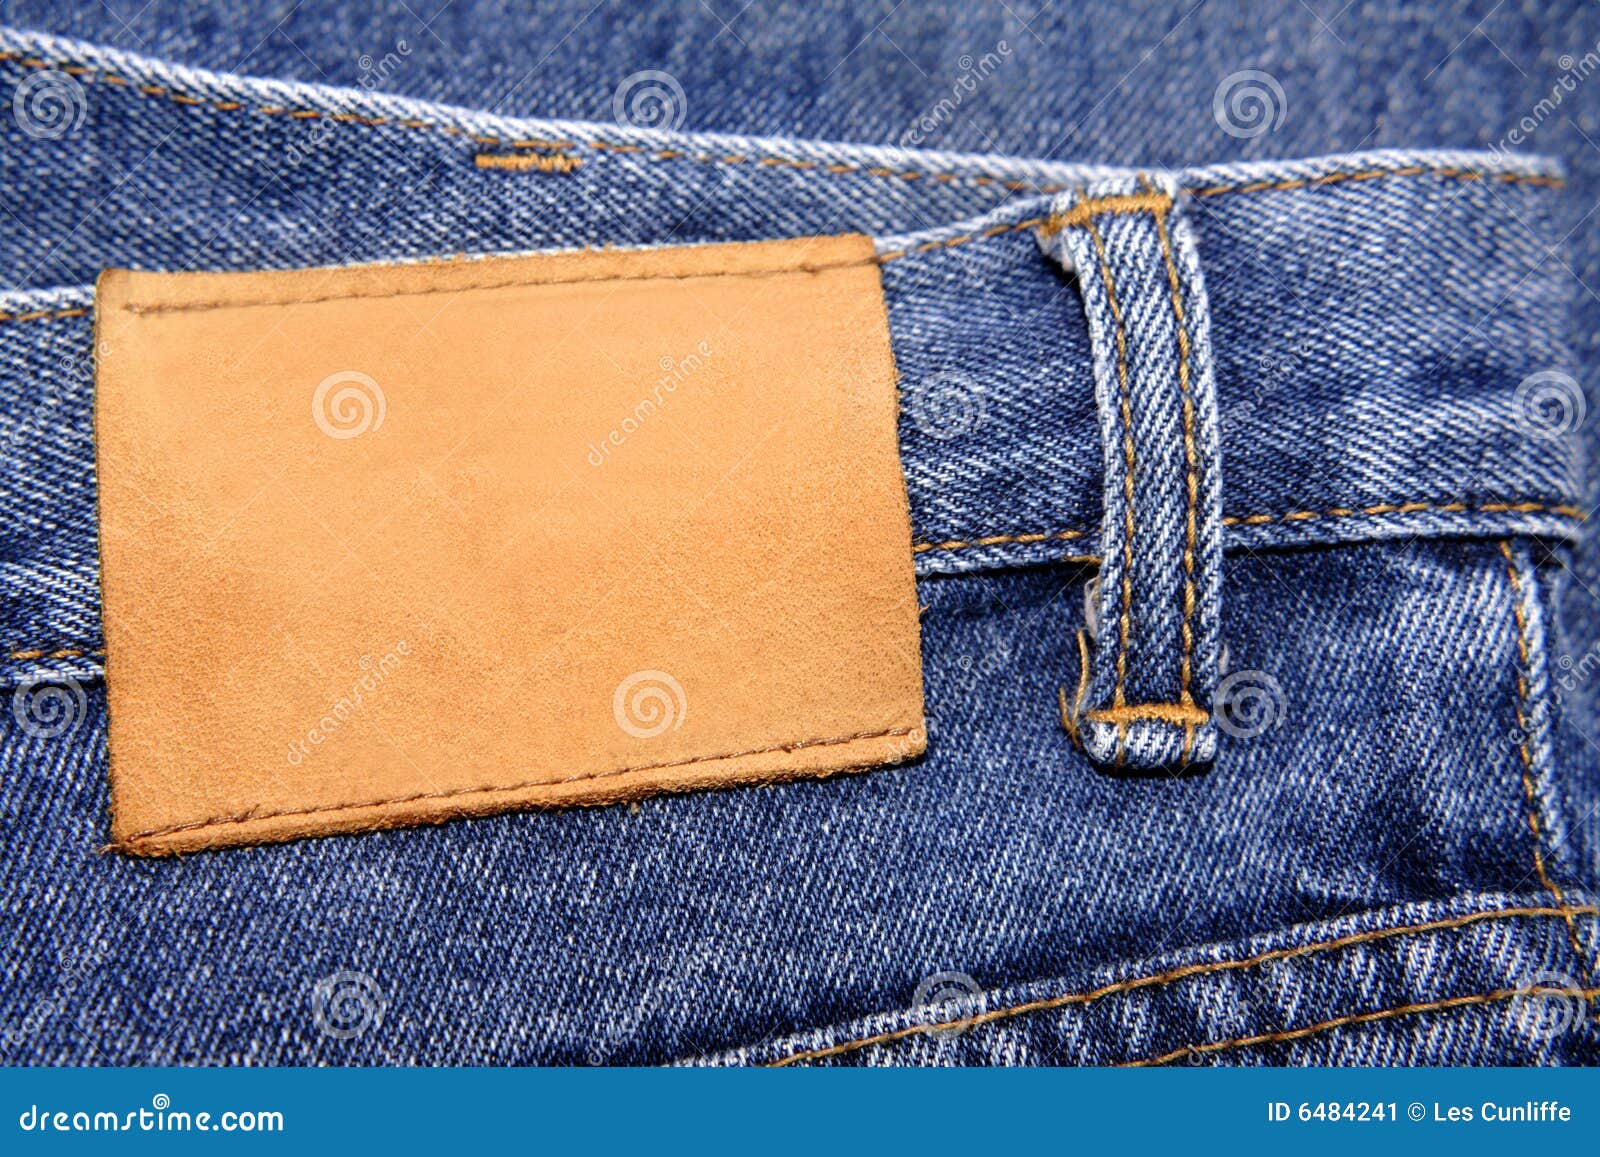 Label on jeans stock image. Image of clothes, trouser - 6484241